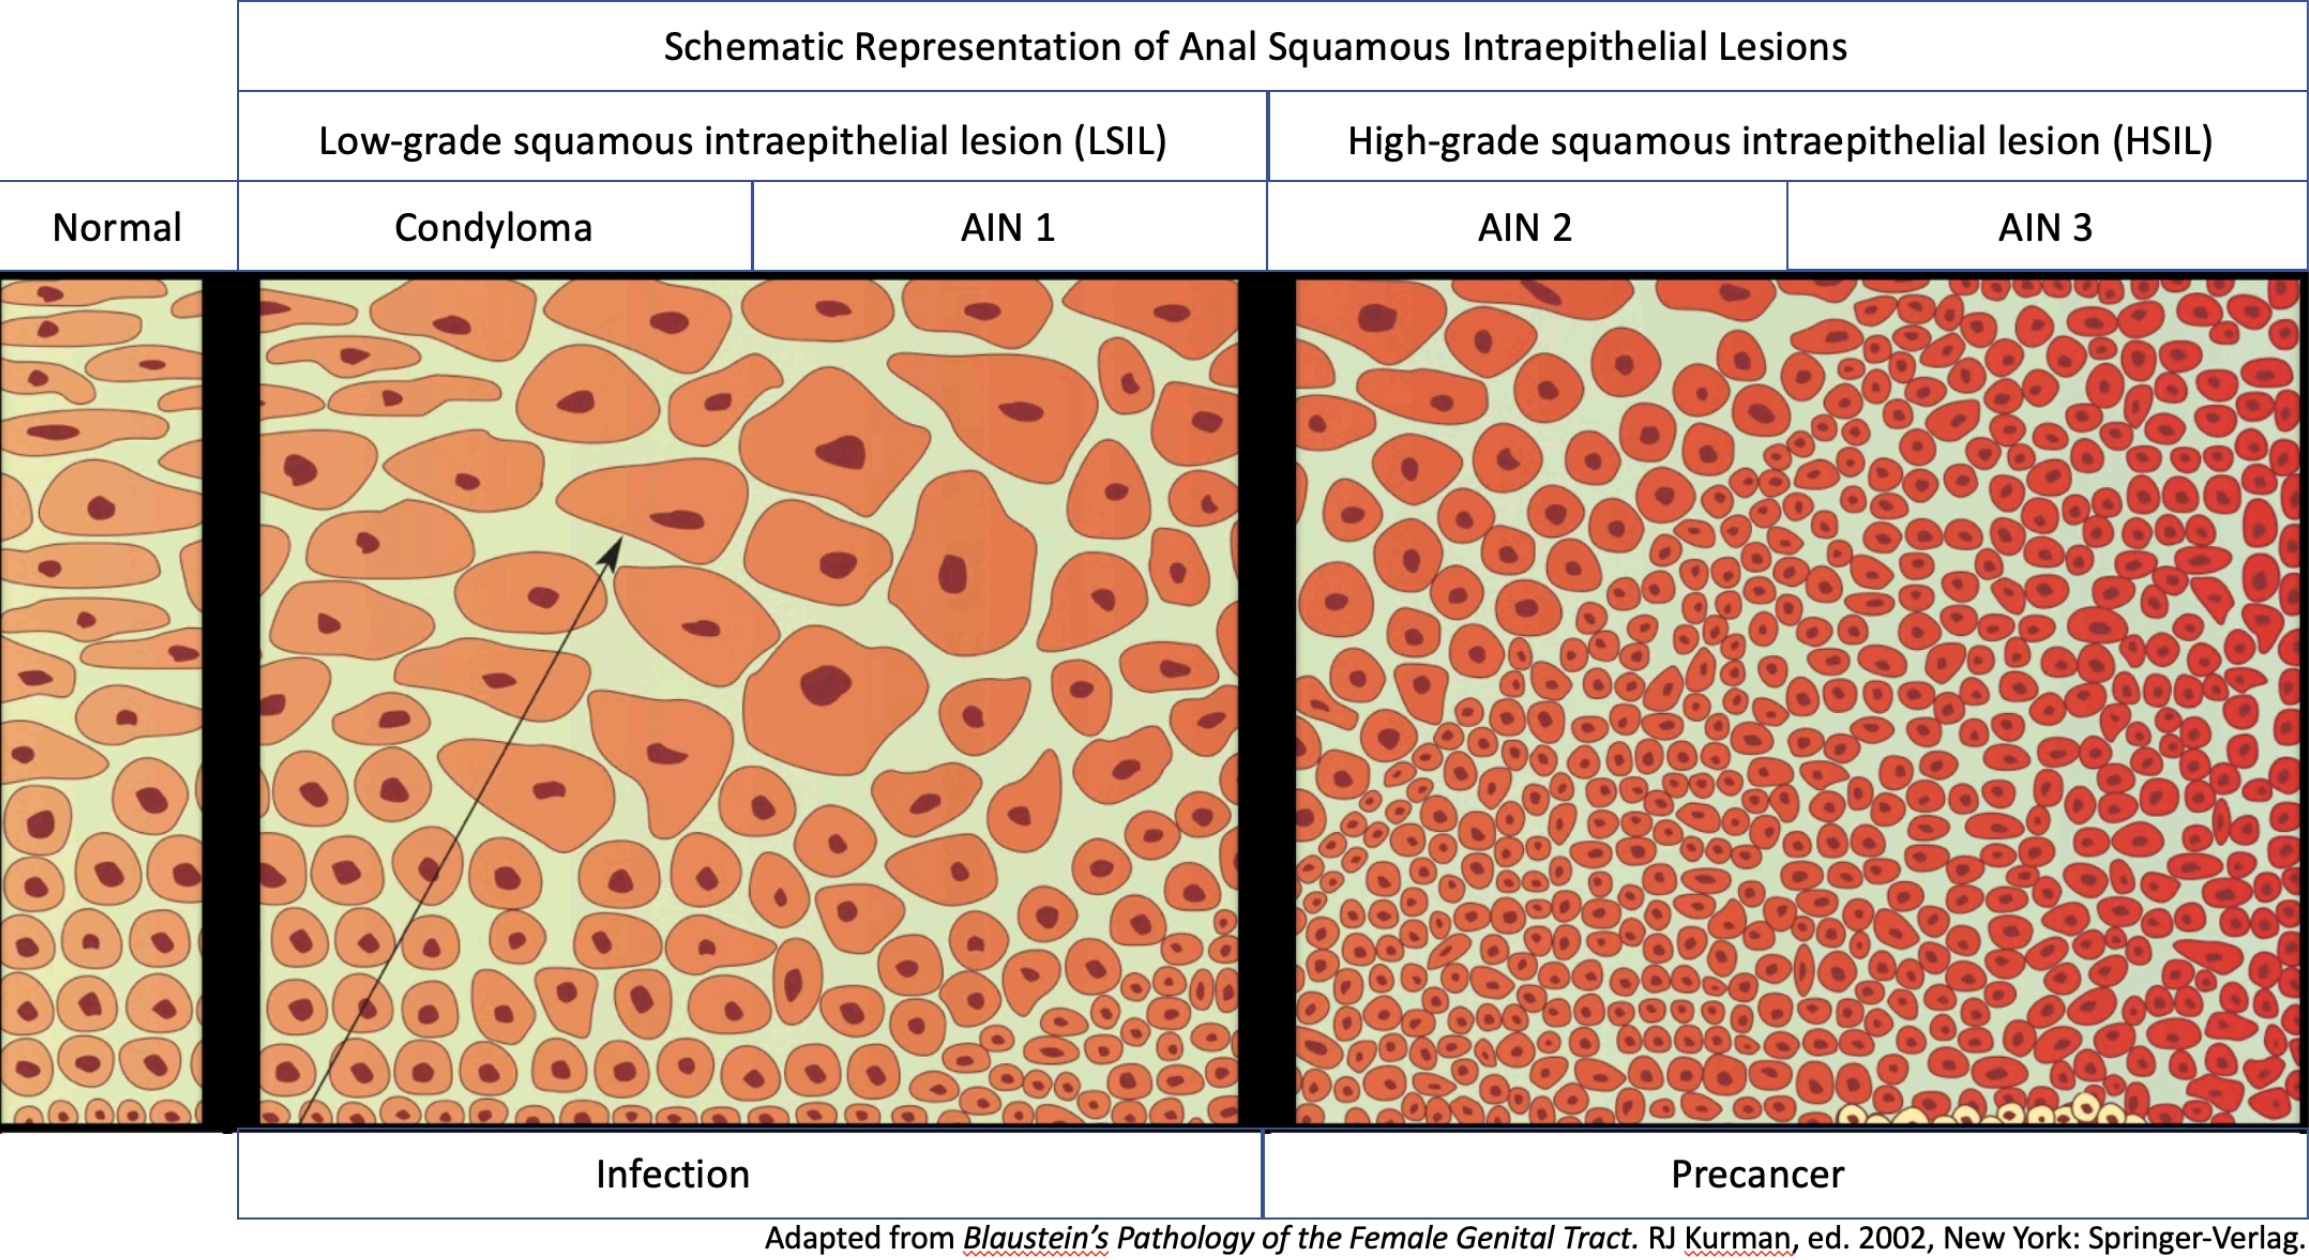 Schematic Representation of Anal Squamous Intraepithelial Lesions